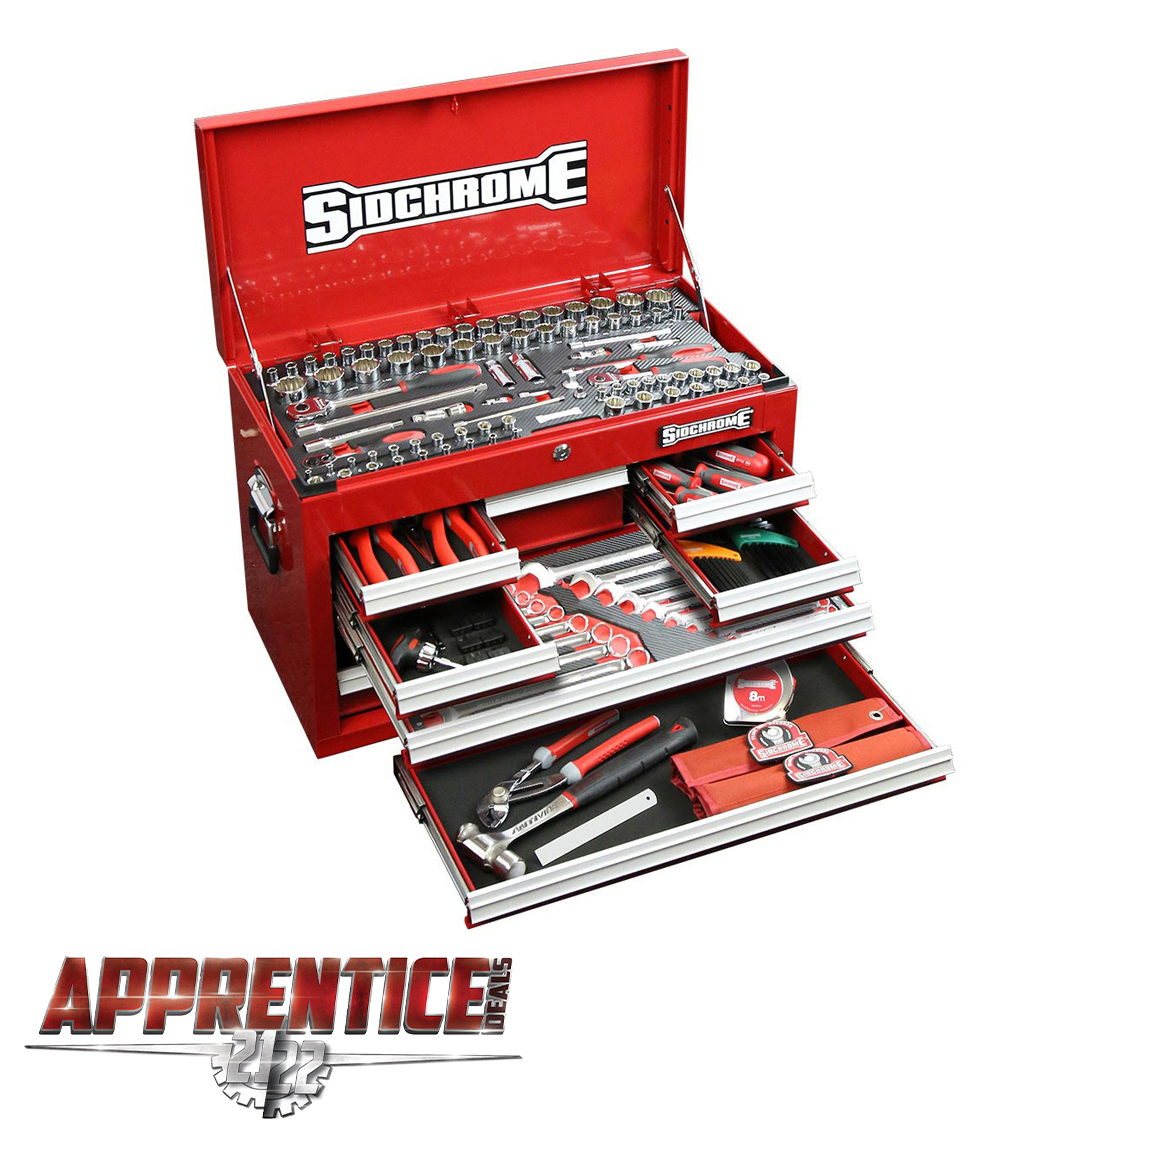 176 Piece Met A/F Tool Kit Top Chest (Apprentice) - SIDCHROME Tools & Tool Storage